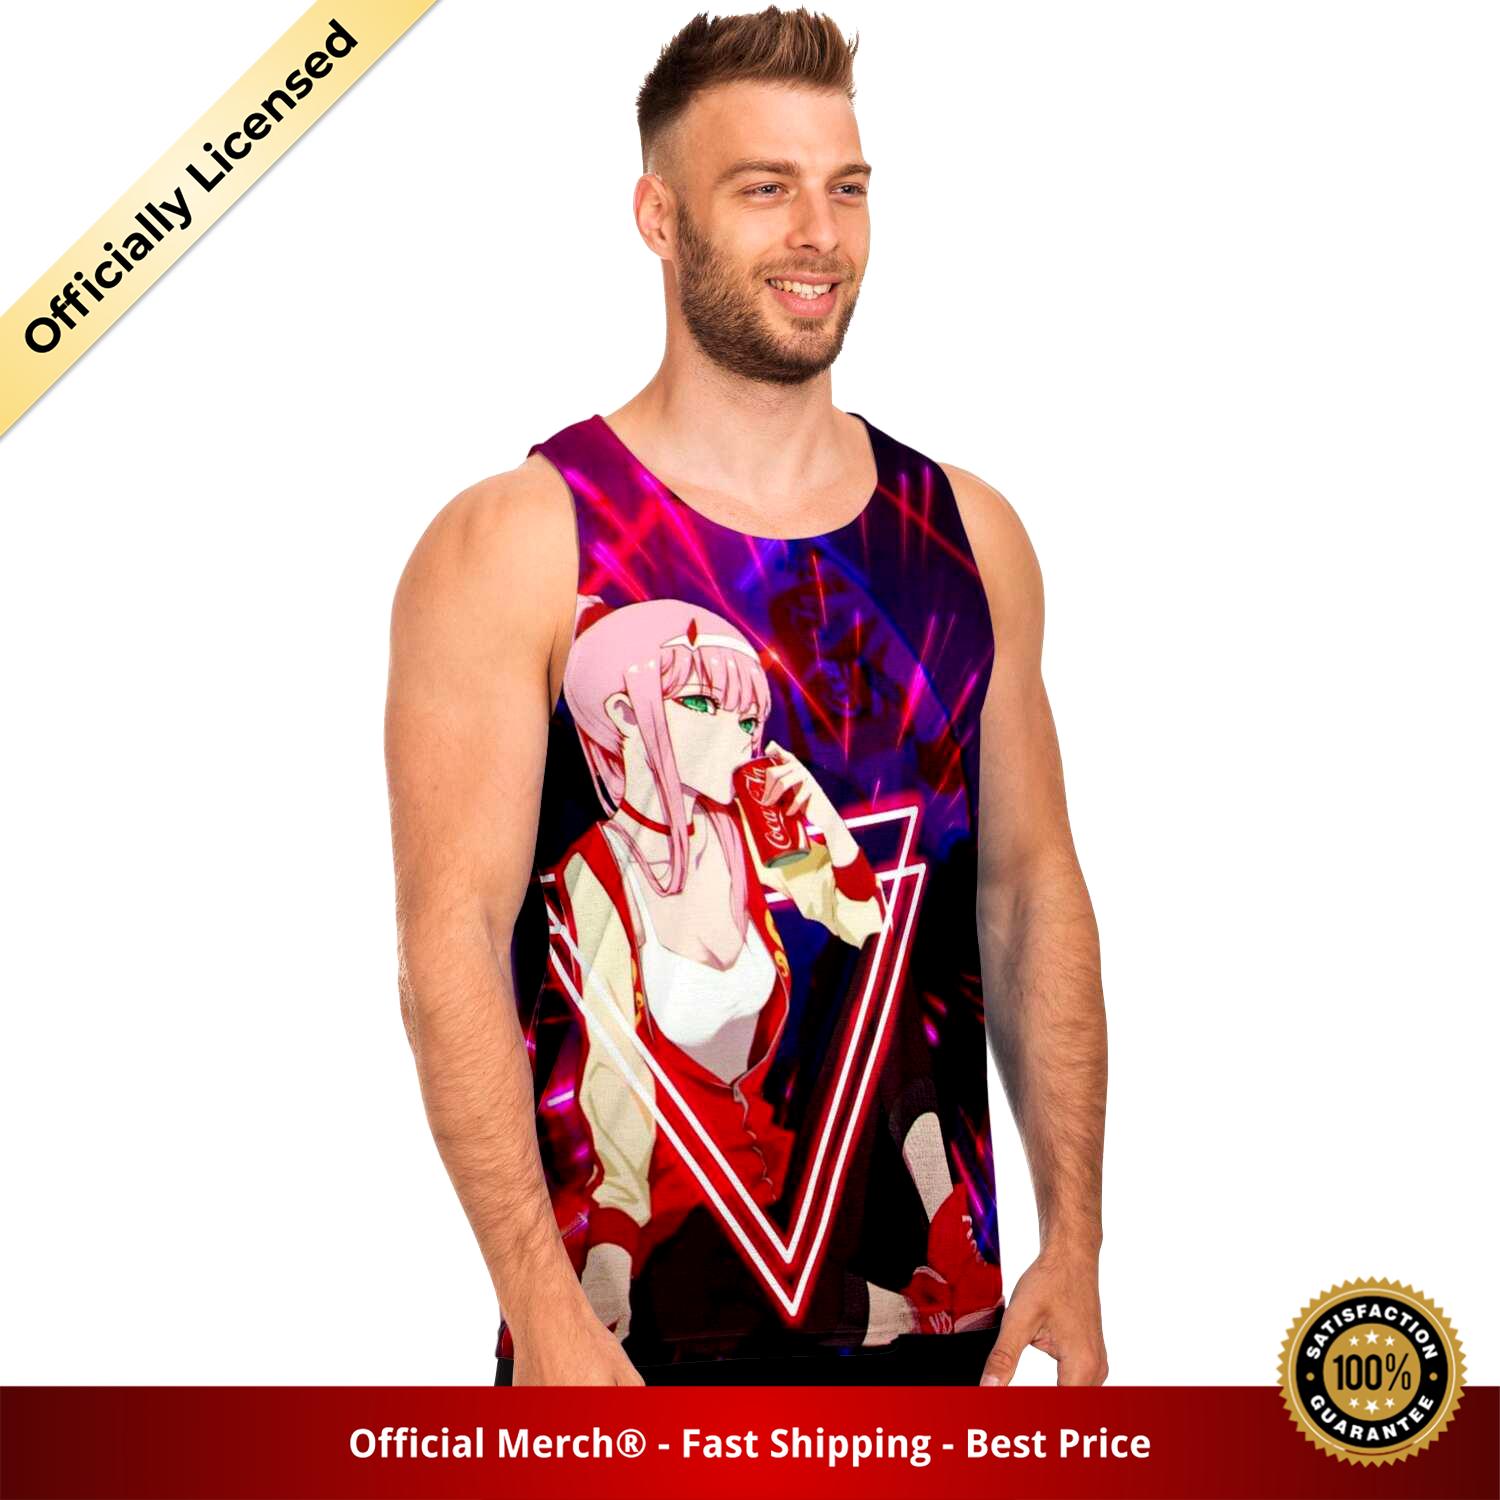 Darling In The Franxx Tank Top No.07